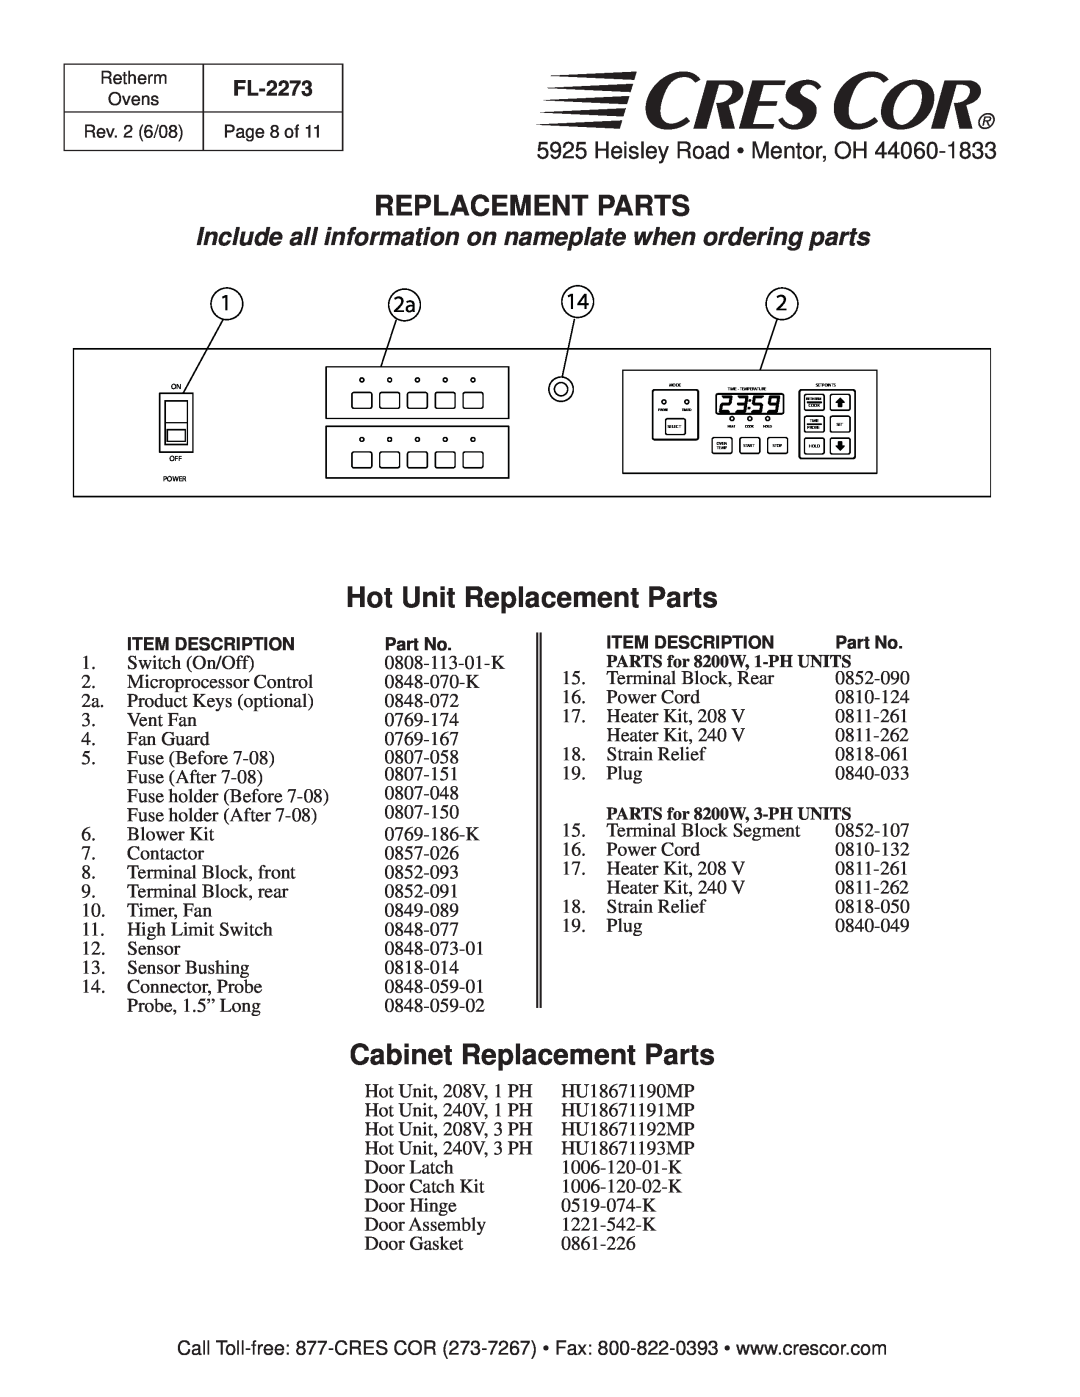 Cres Cor RR-1332 manual Hot Unit Replacement Parts, Cabinet Replacement Parts, Heisley Road Mentor, OH, FL-2273 